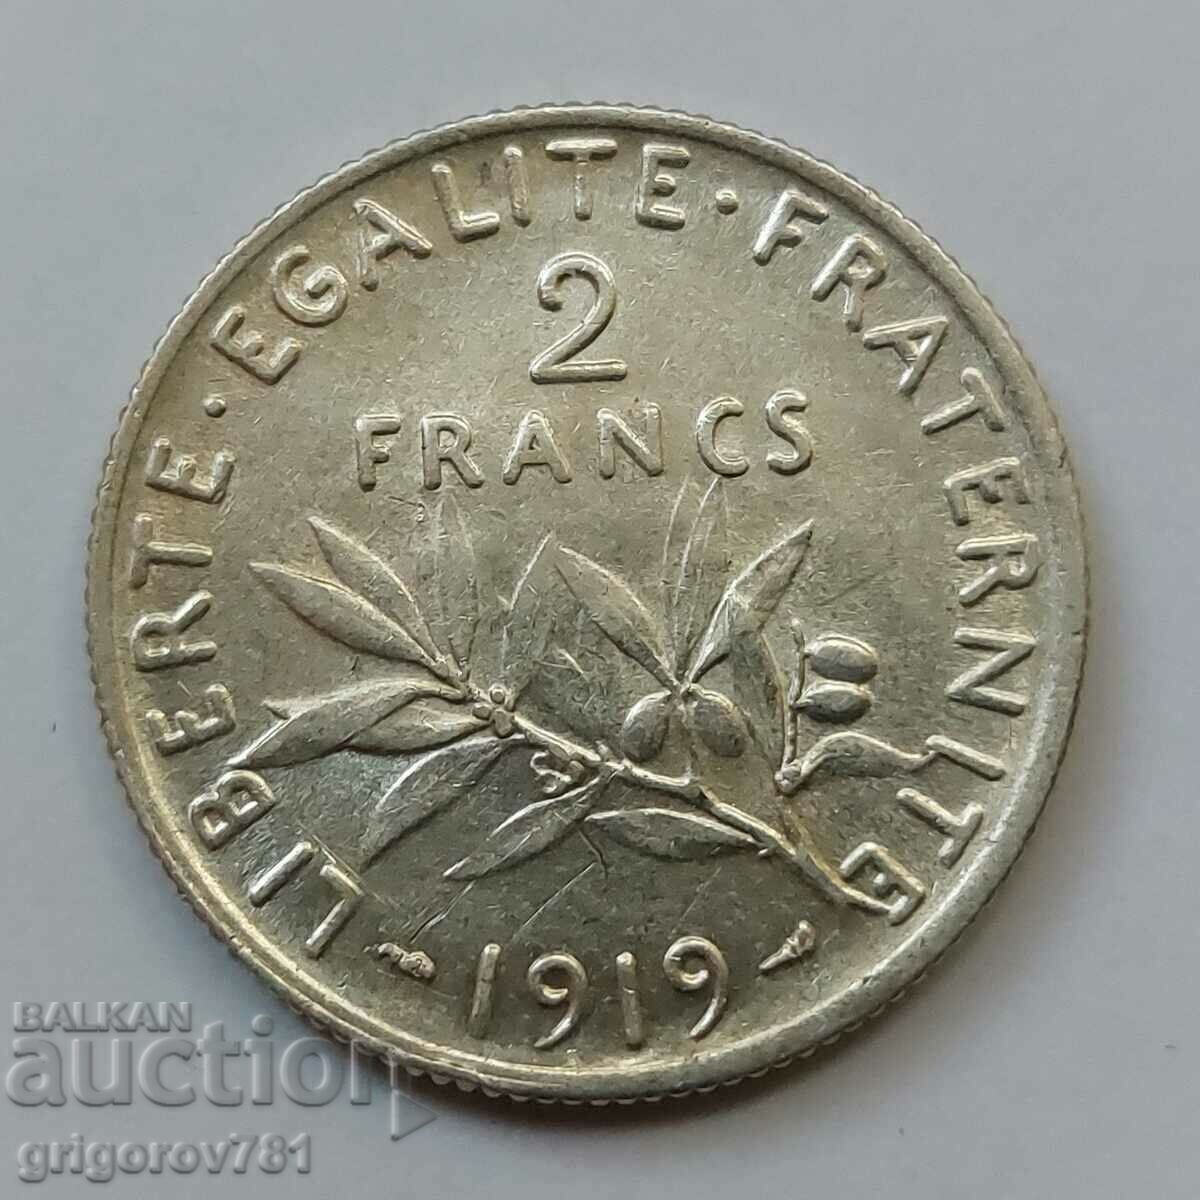 2 Francs Silver France 1919 - Silver Coin #42